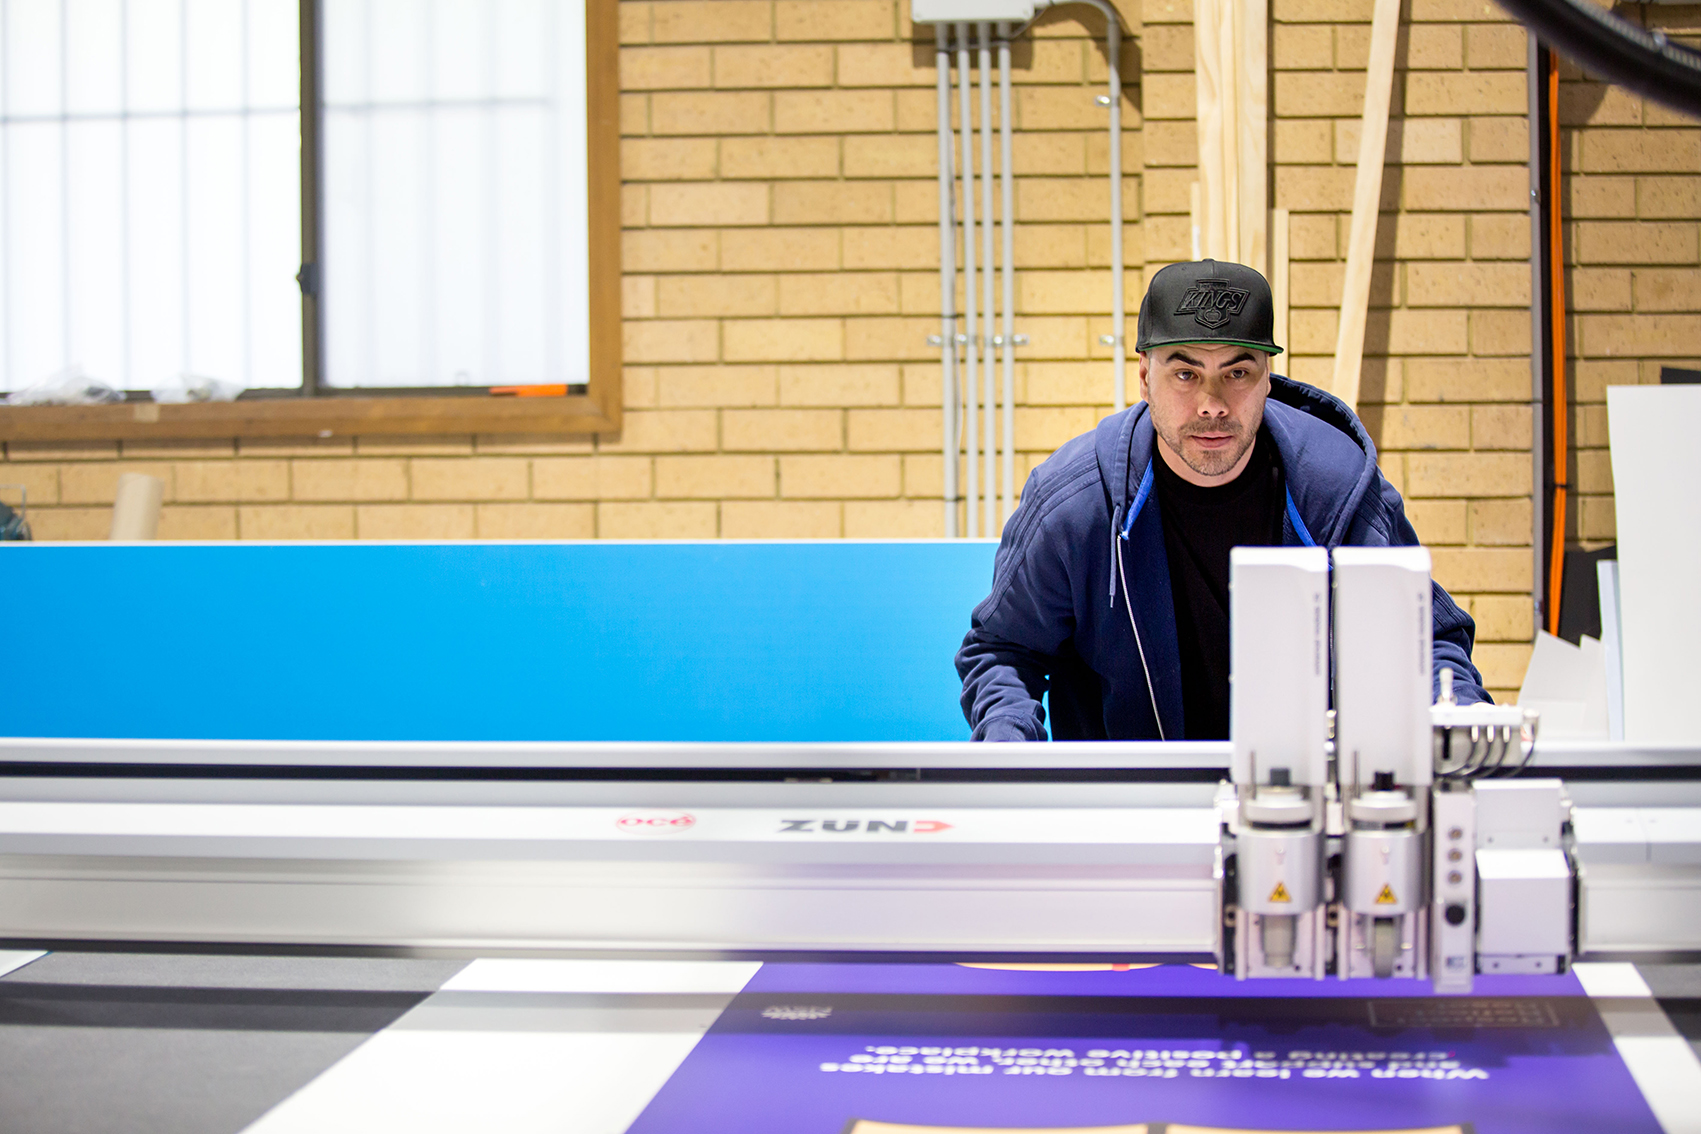 High-quality Large Format Printing